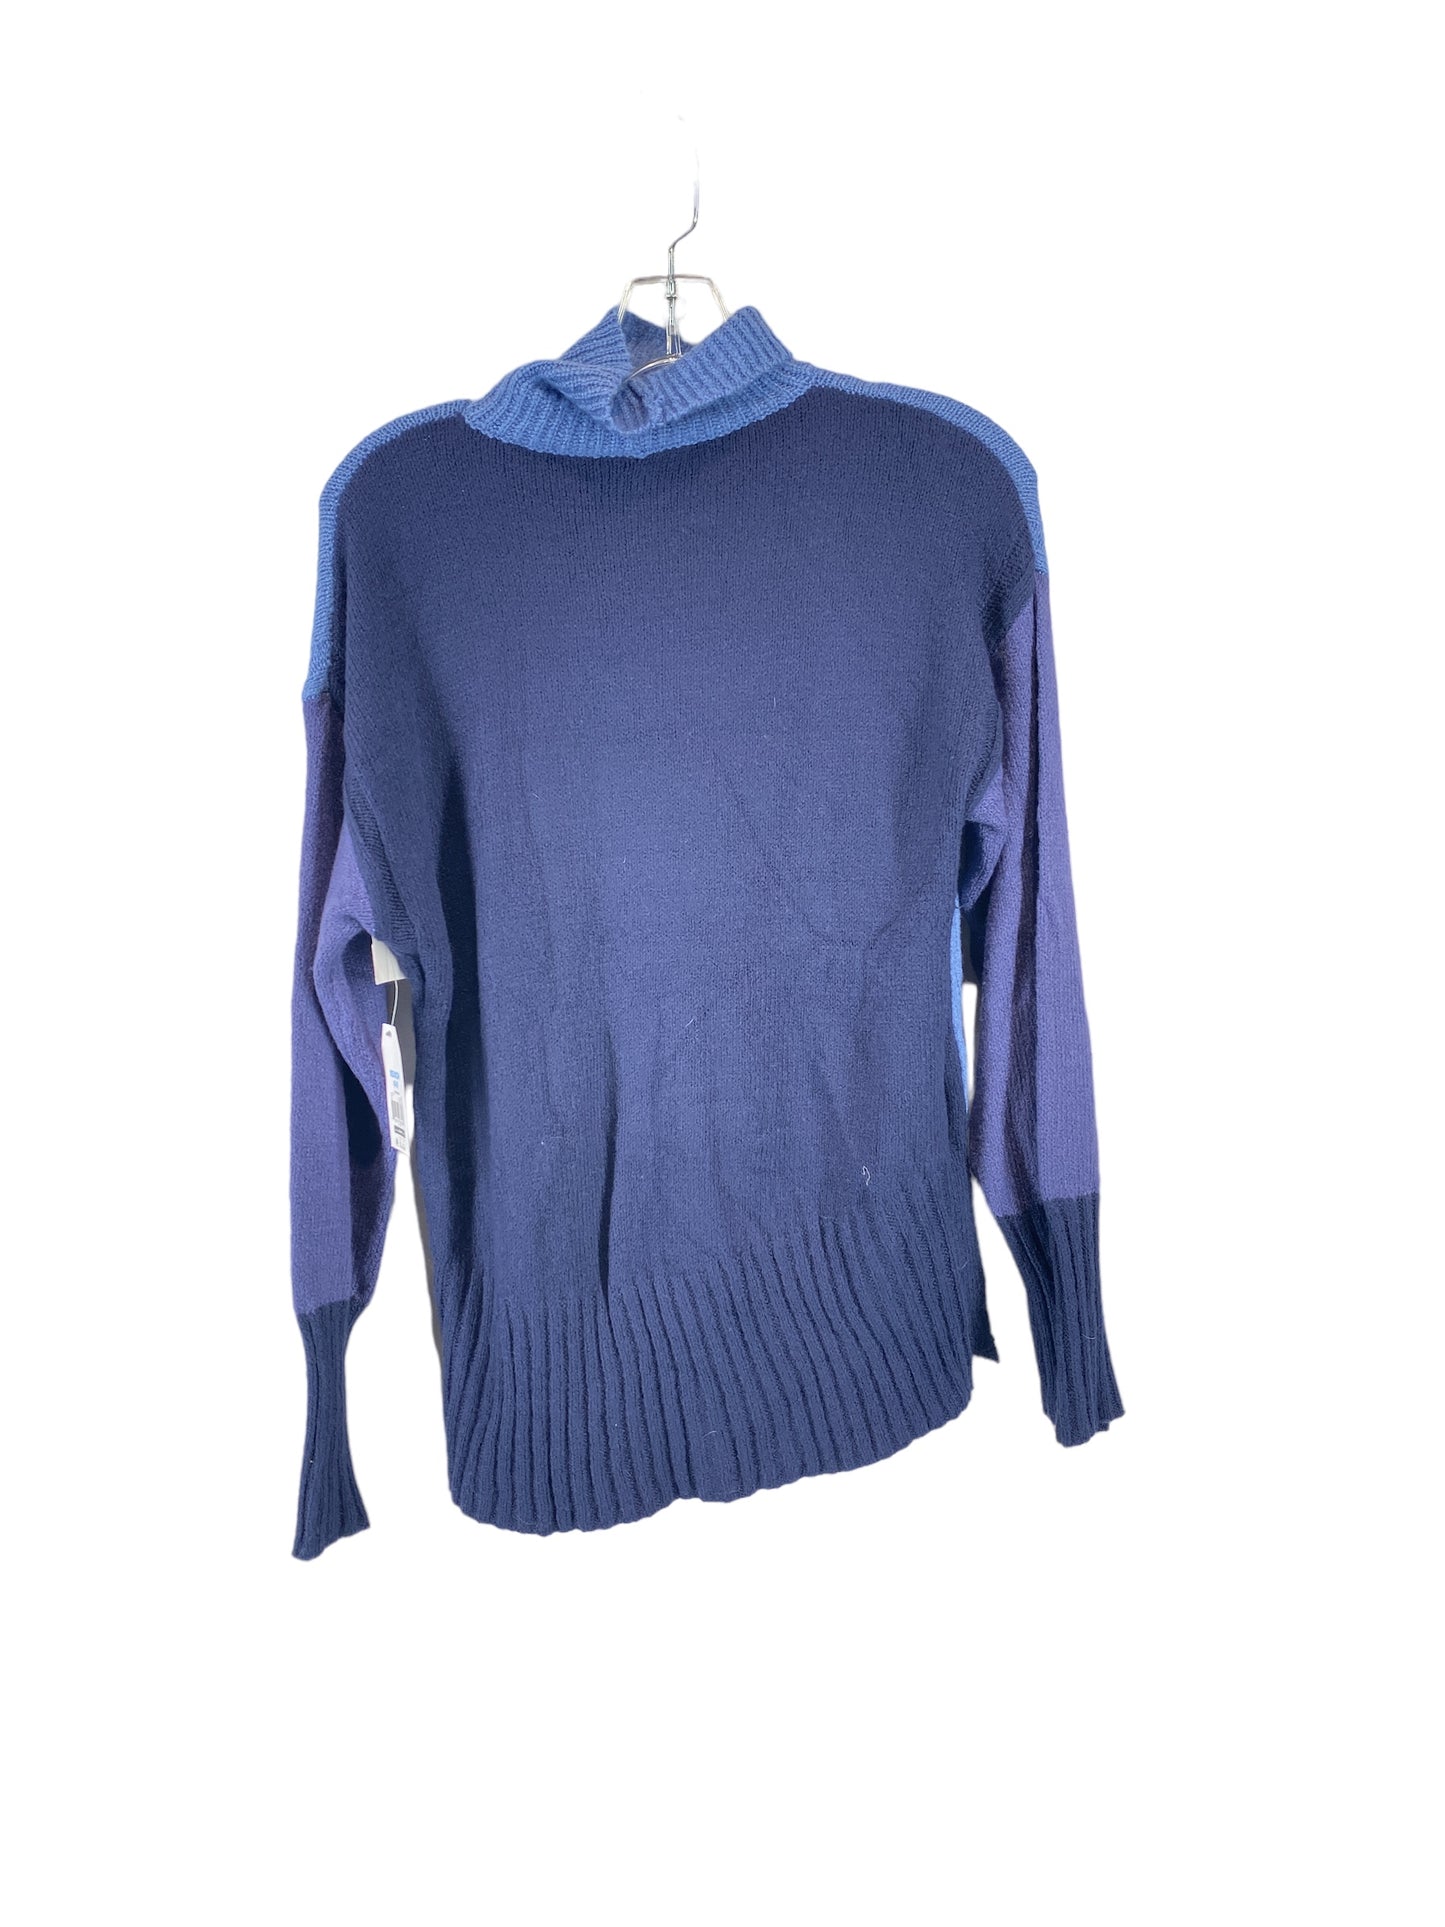 Sweater By Time And Tru  Size: Xs